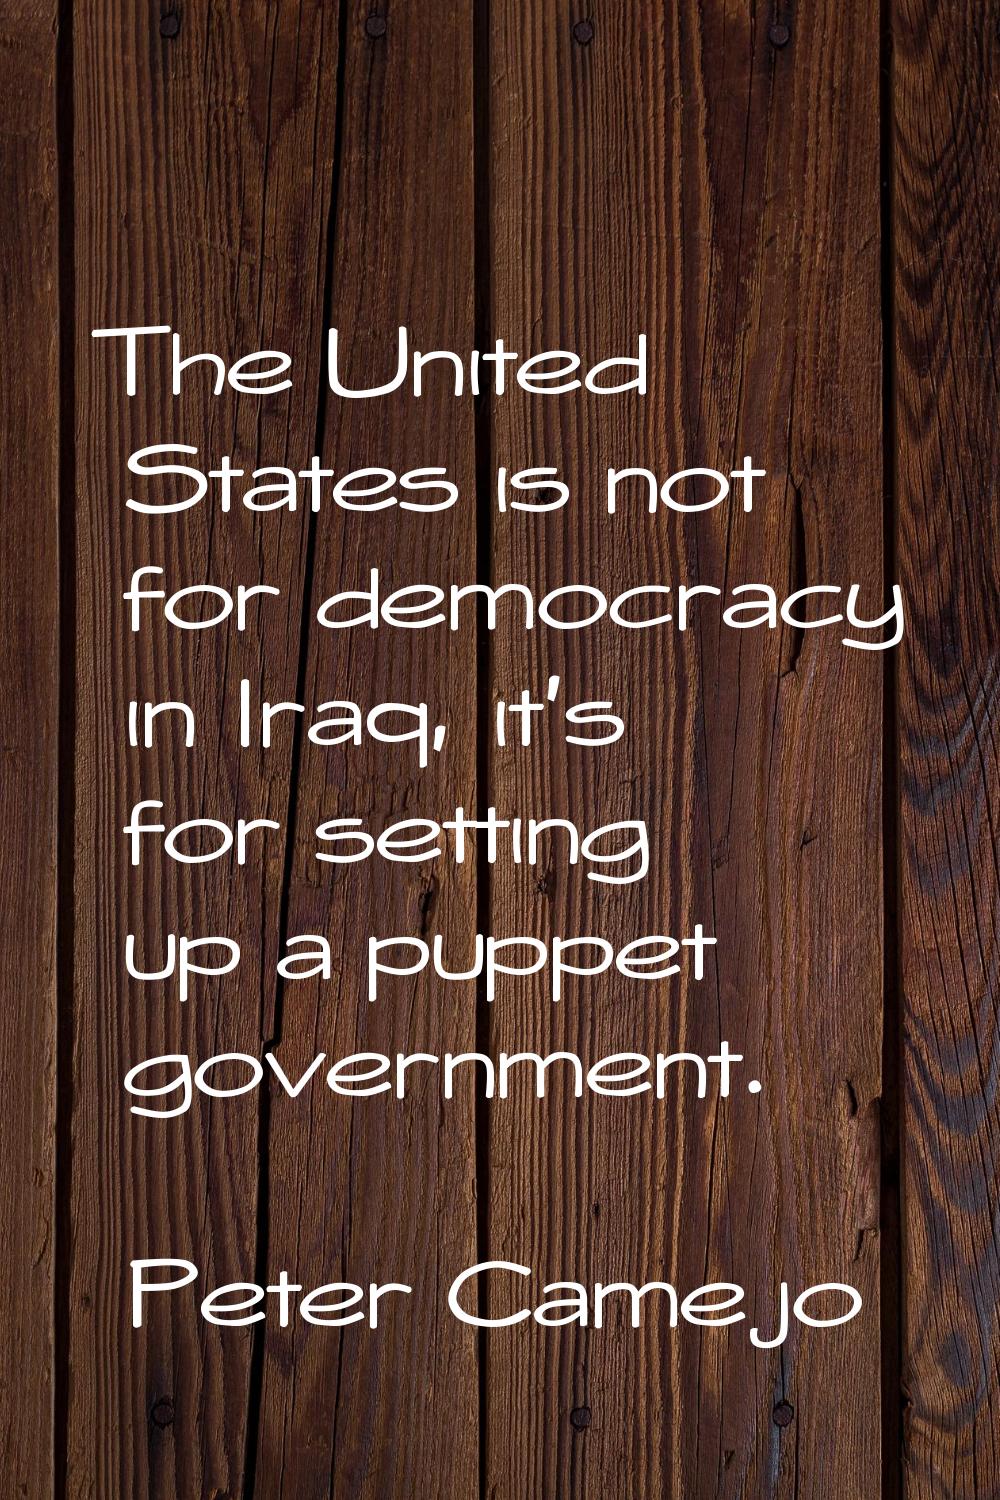 The United States is not for democracy in Iraq, it's for setting up a puppet government.